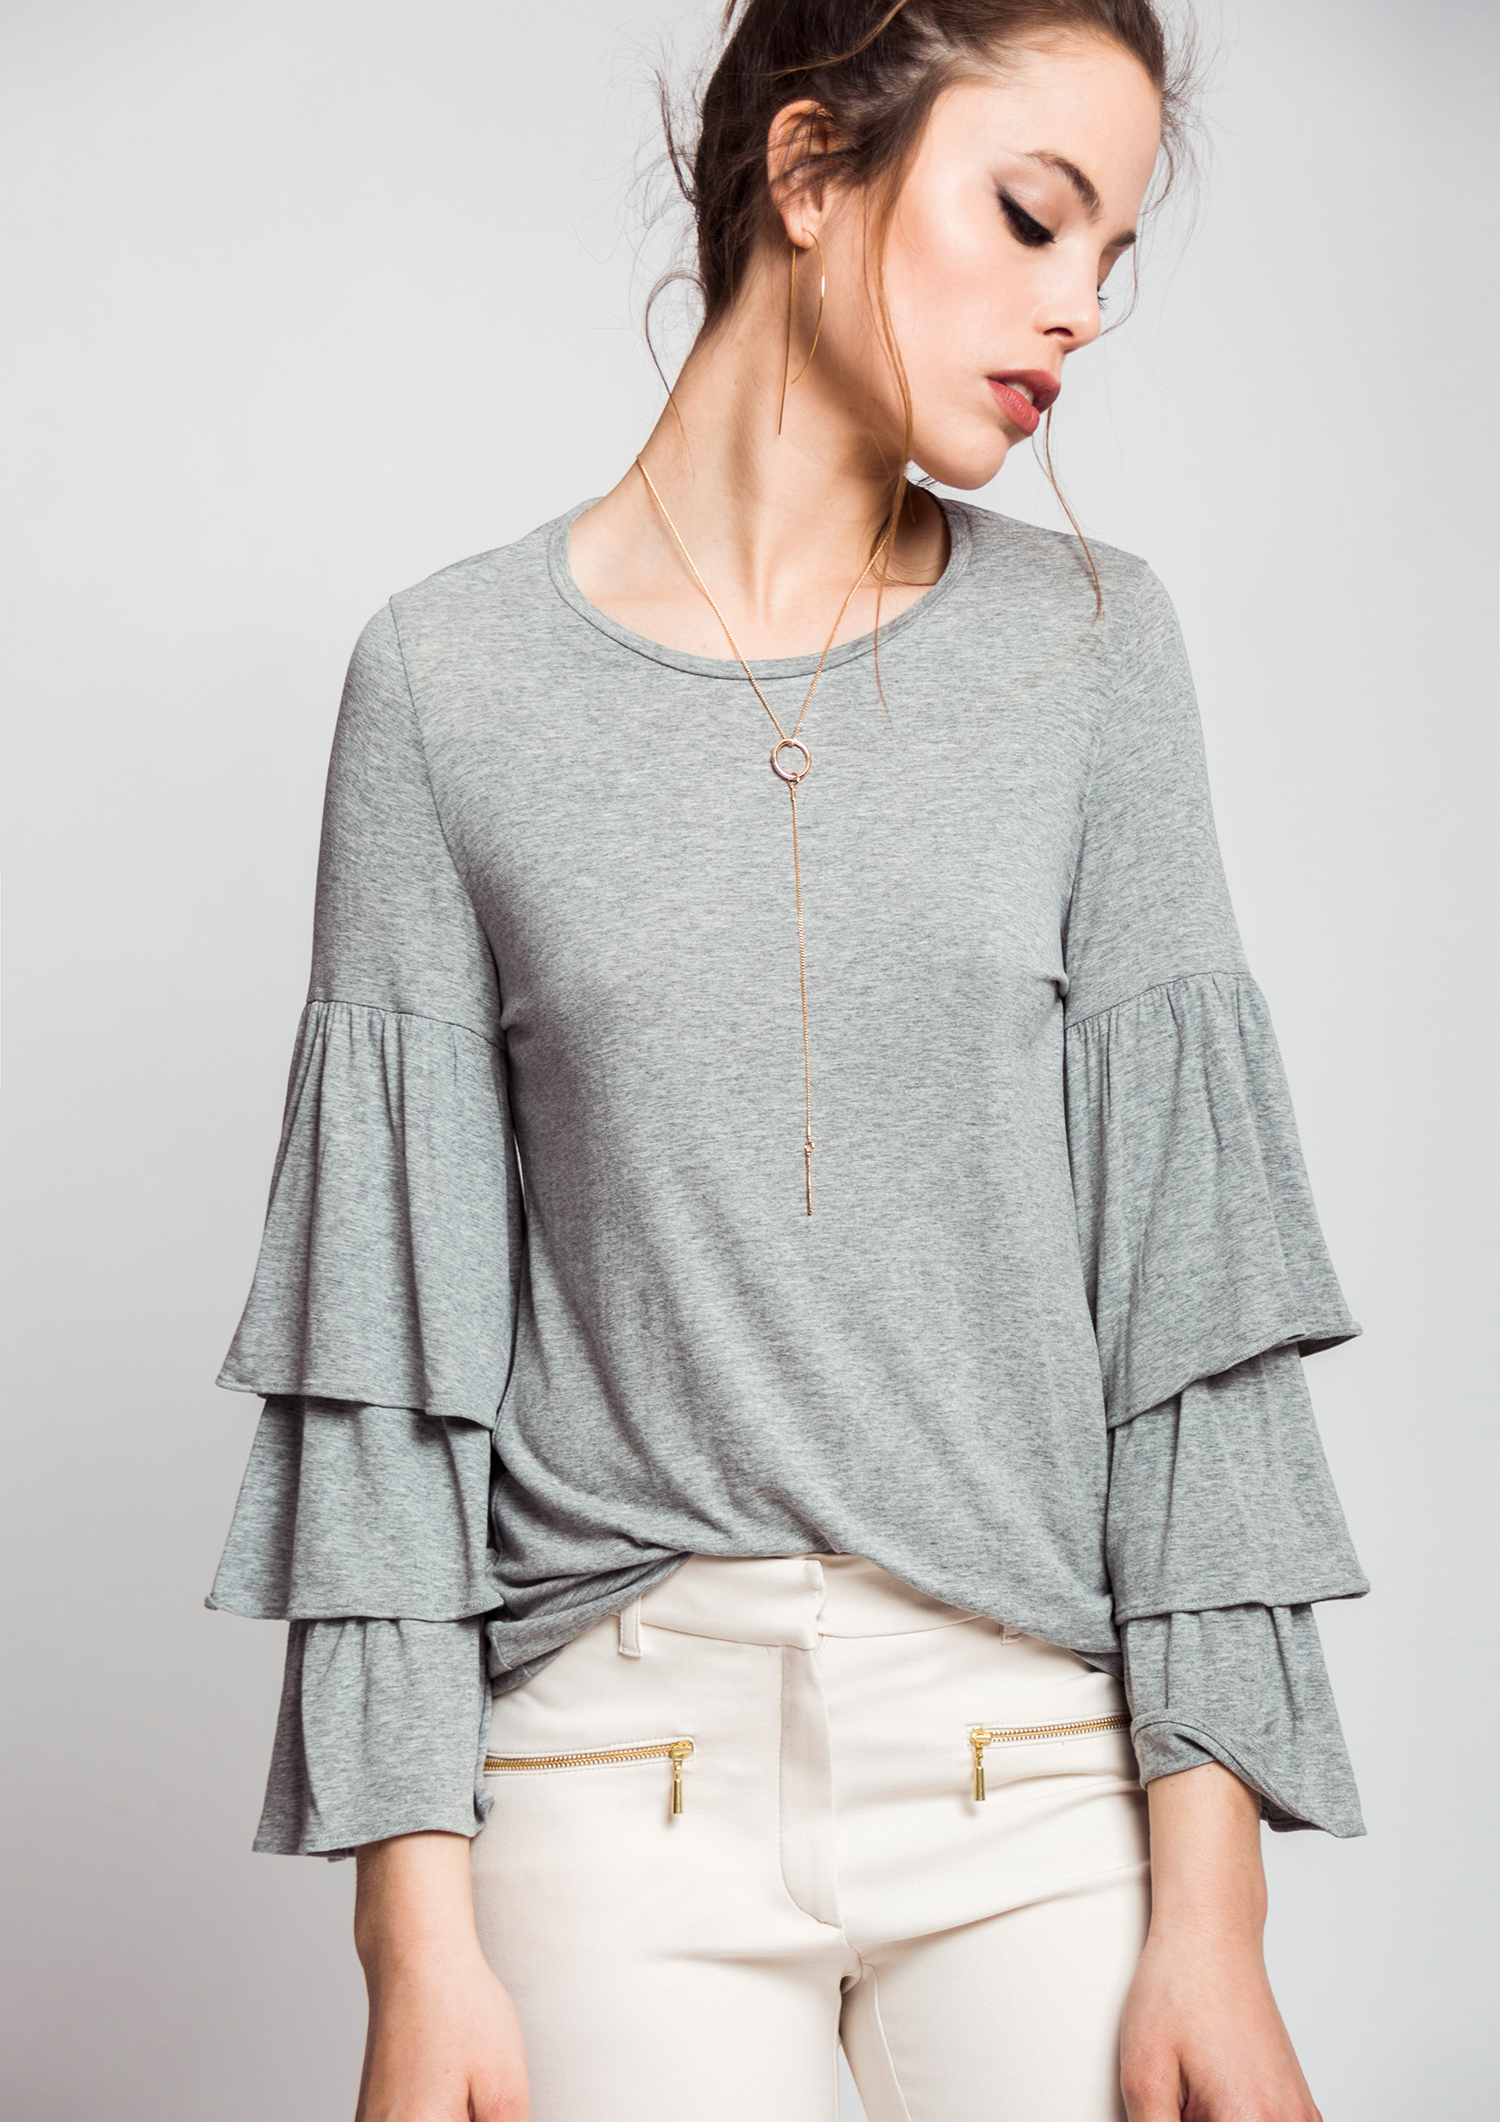 Grey T-shirt with frill sleeves.